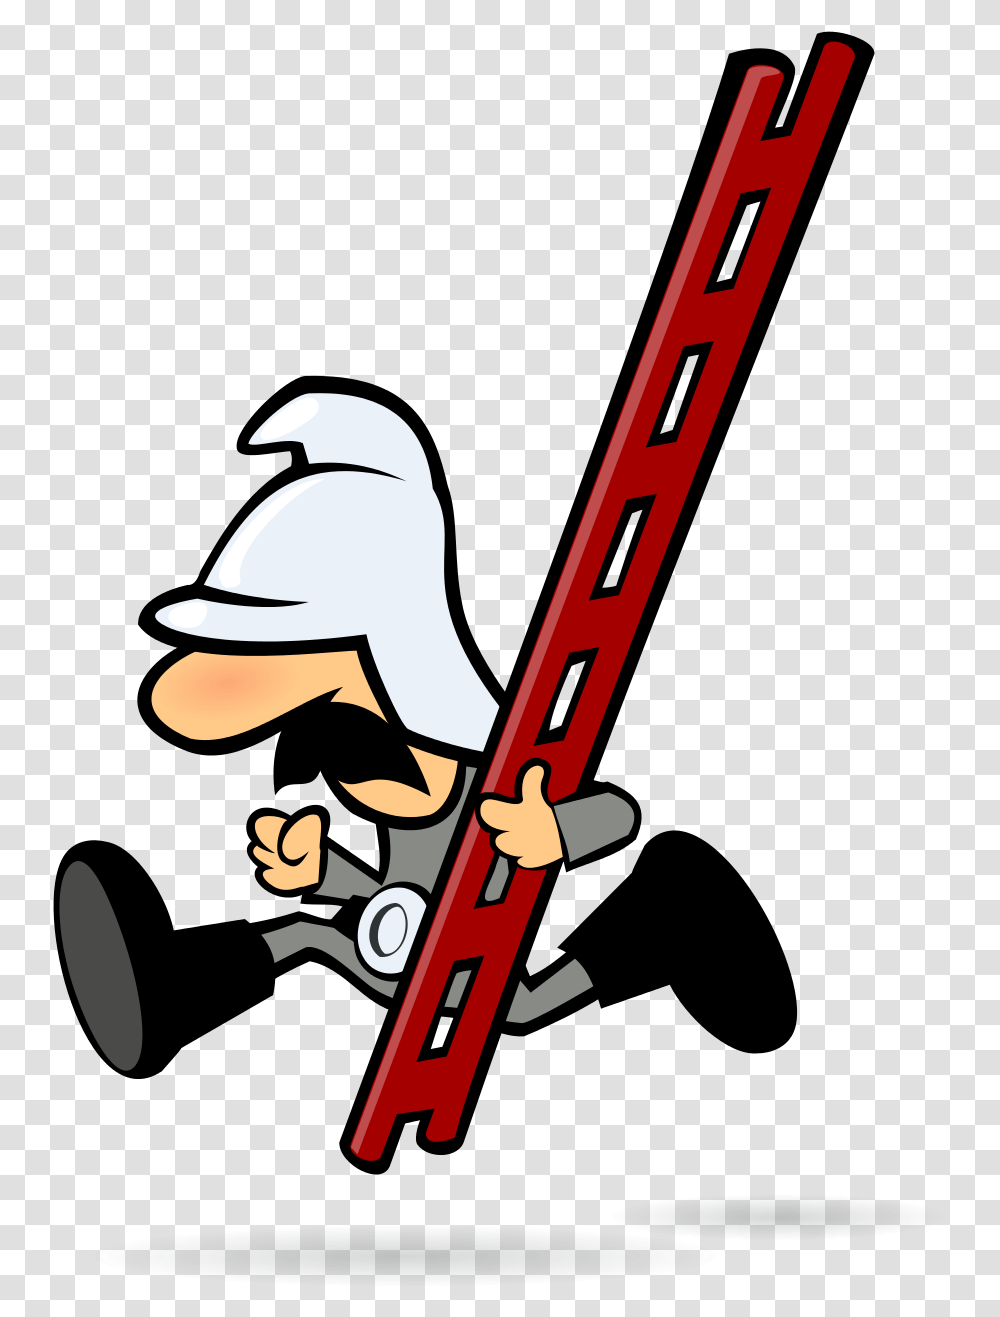 Fireman Ladder2 By Mimooh Scalable Vector Graphics, Sport, Sports, Outdoors Transparent Png